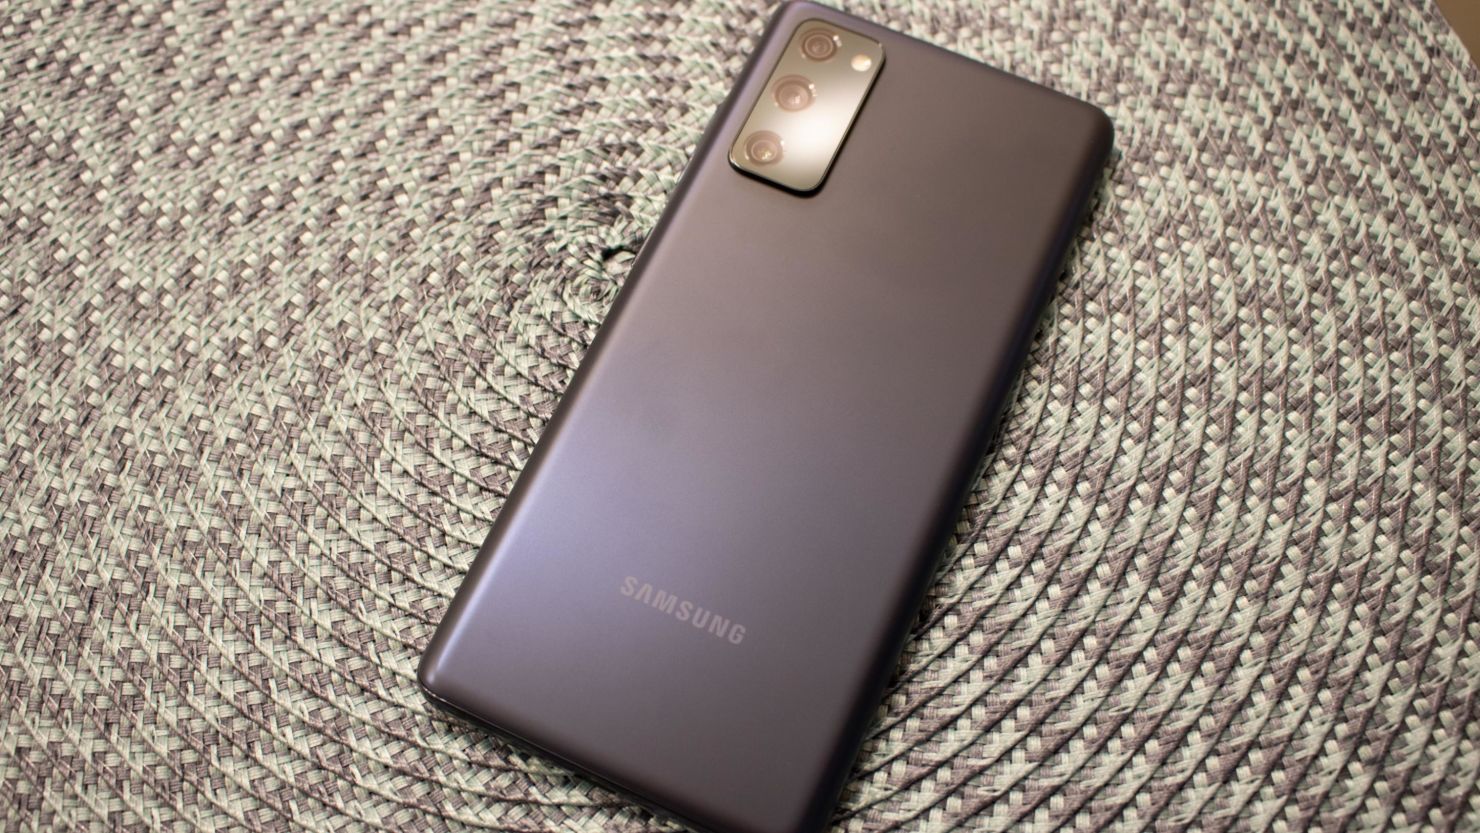 Samsung Galaxy S20 FE review